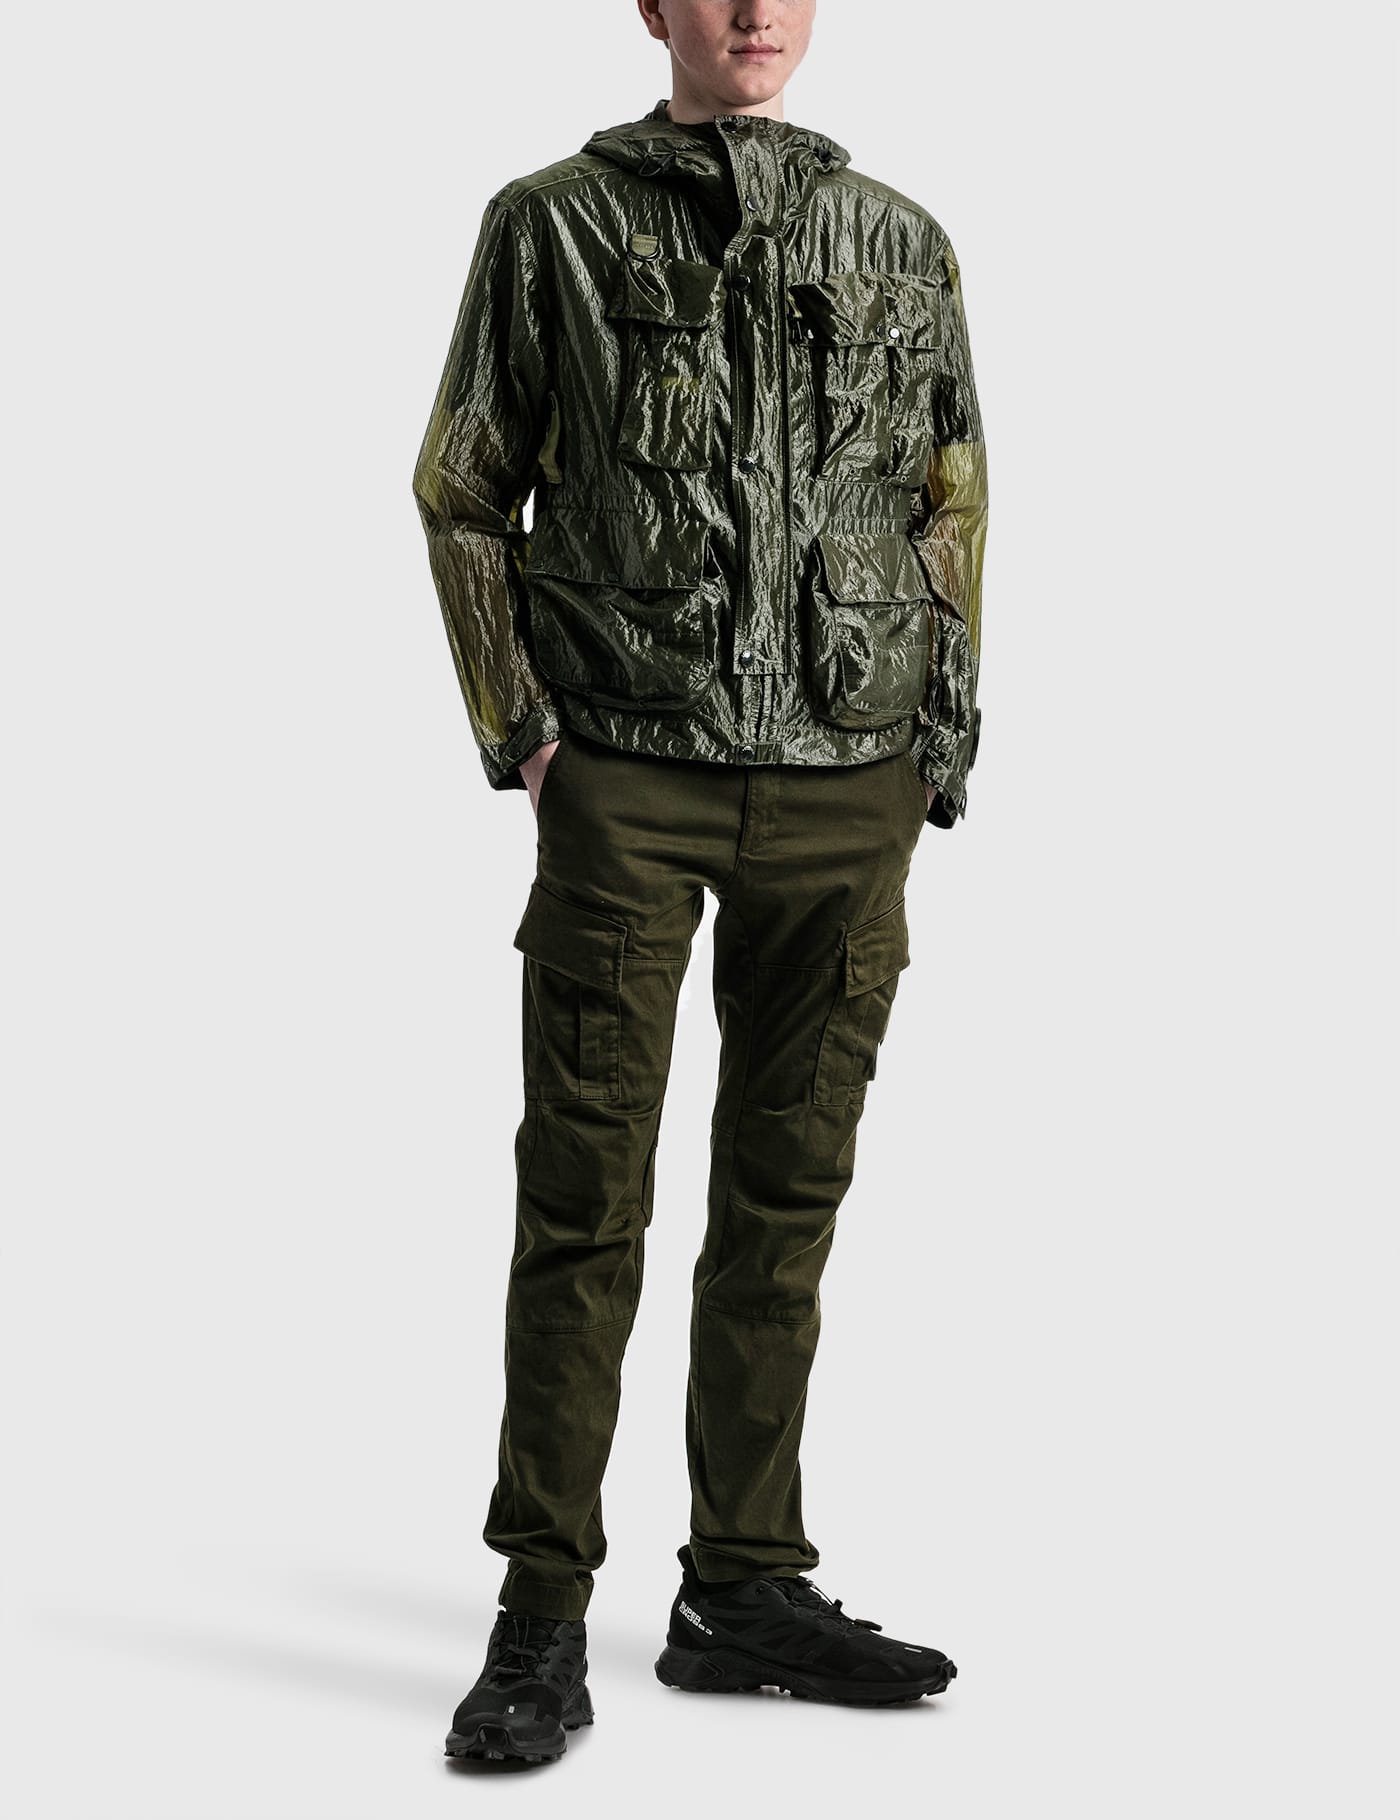 C.P. Company - Kan-d La Mille Jacket | HBX - Globally Curated 